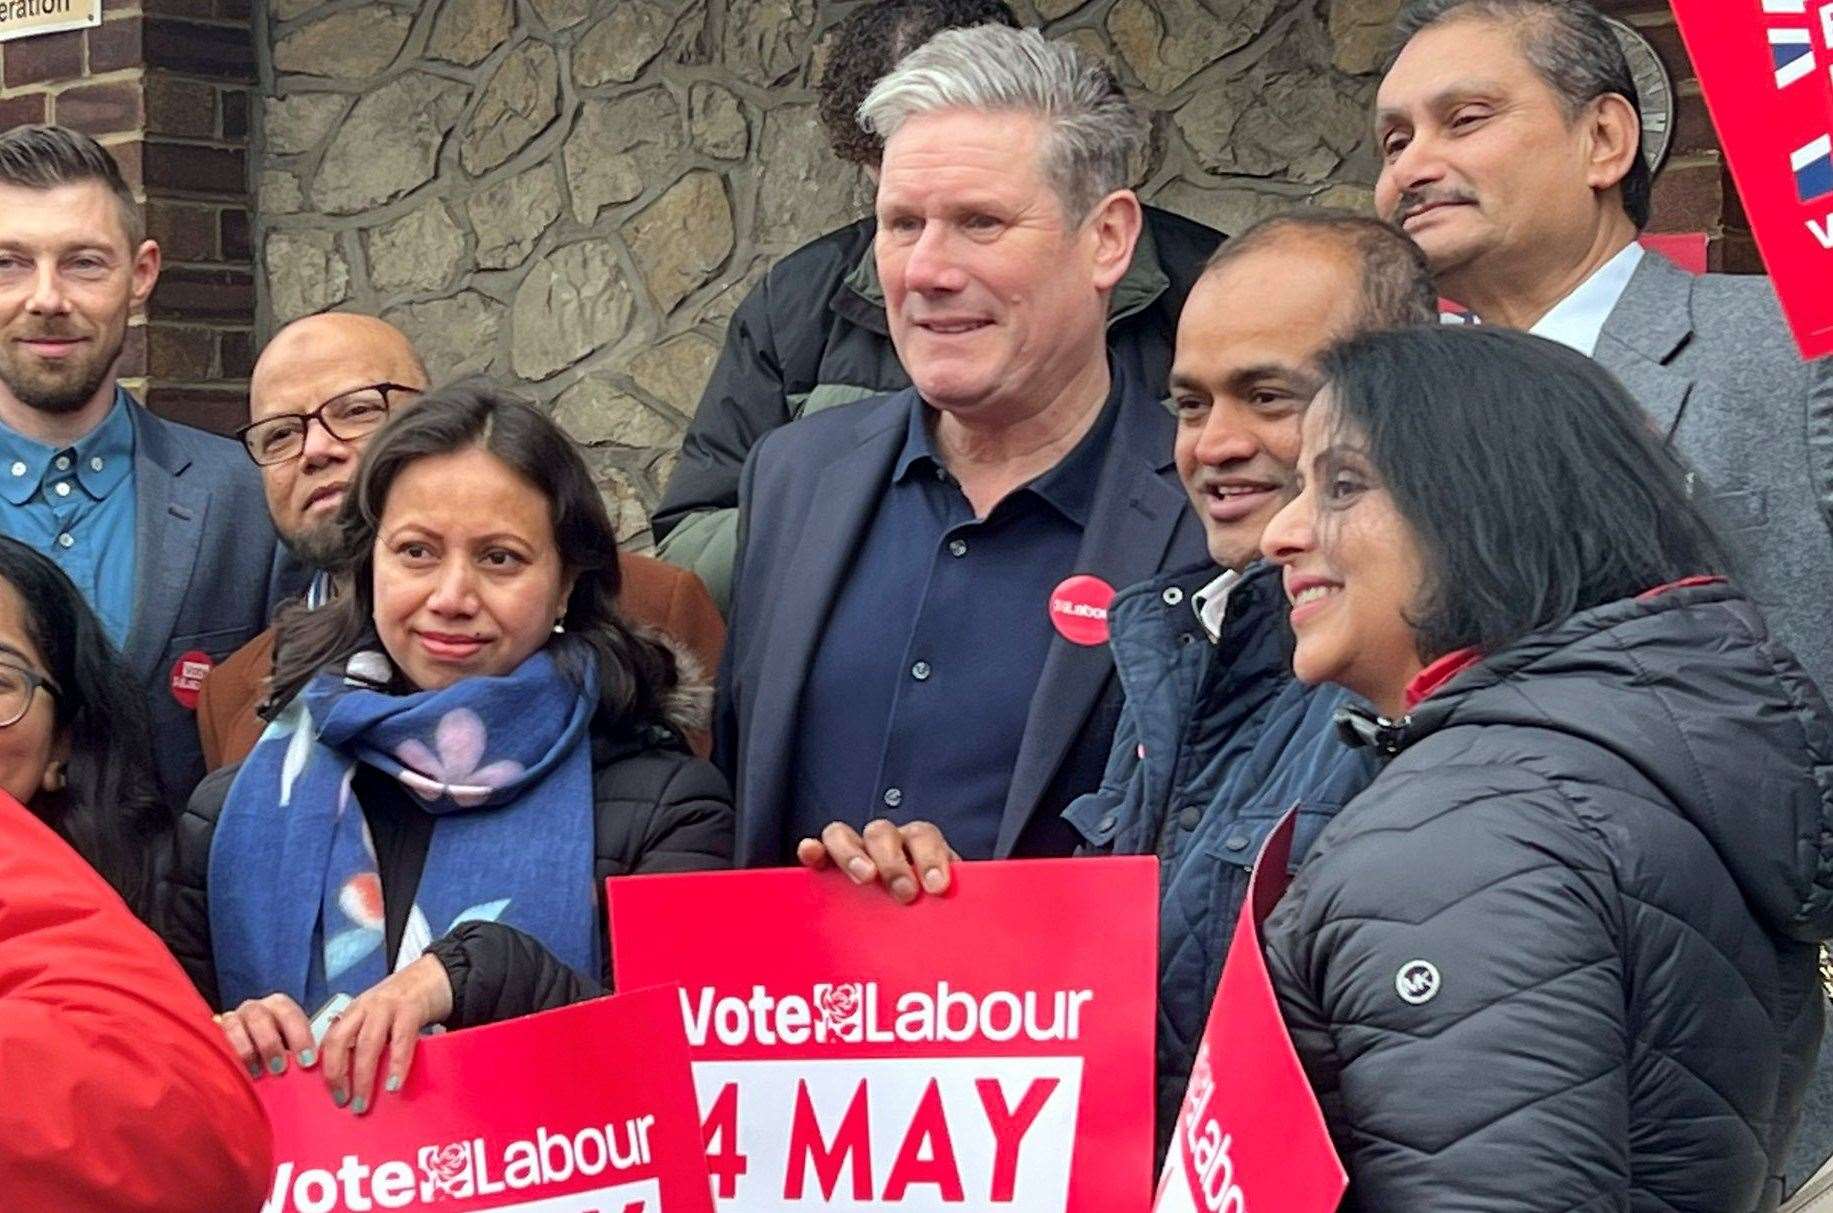 Sir Keir Starmer was forced to drop plans to scrap tuition fees